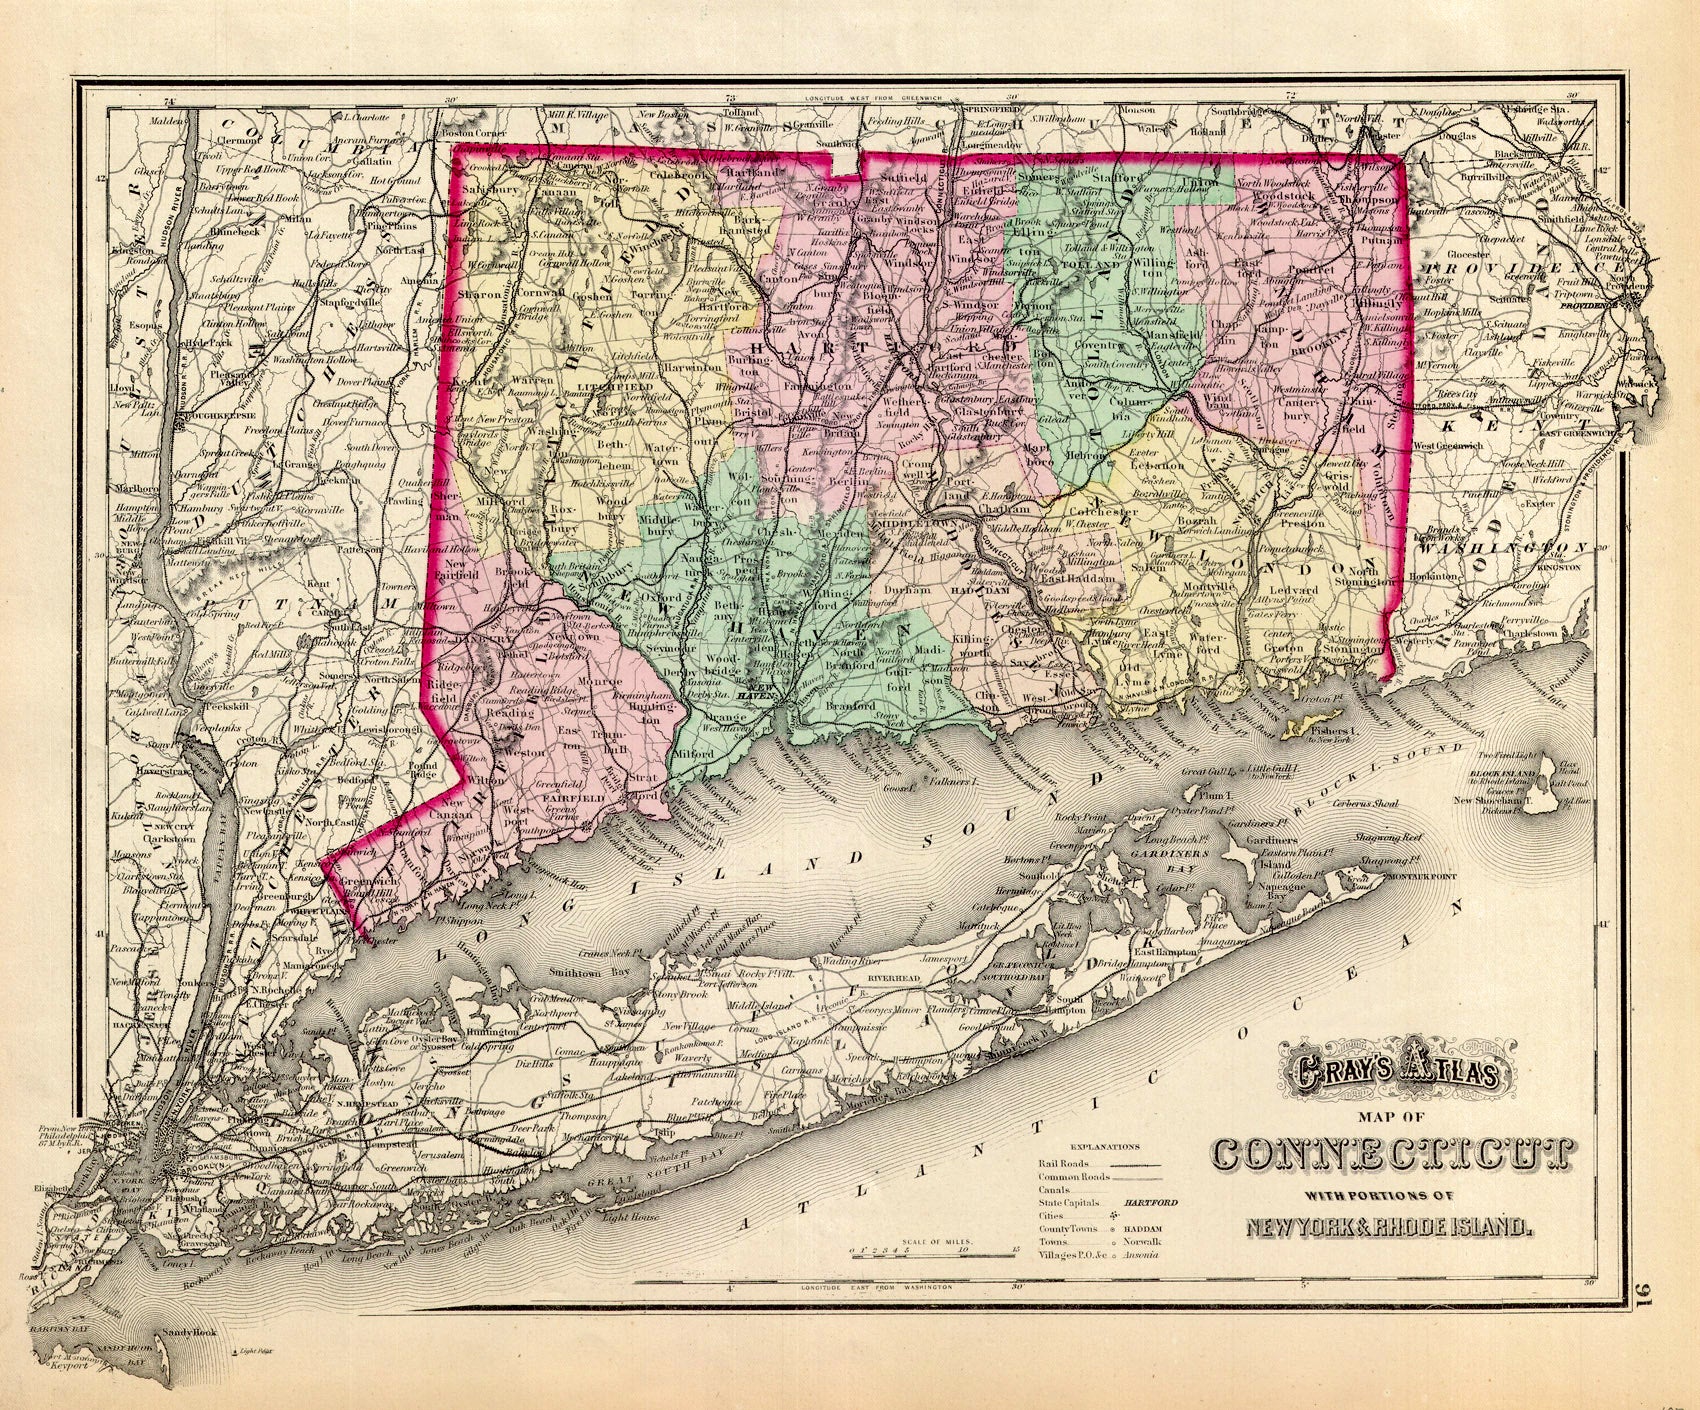 (CT.) Map Of Connecticut With Portions Of New York & Rhode Island